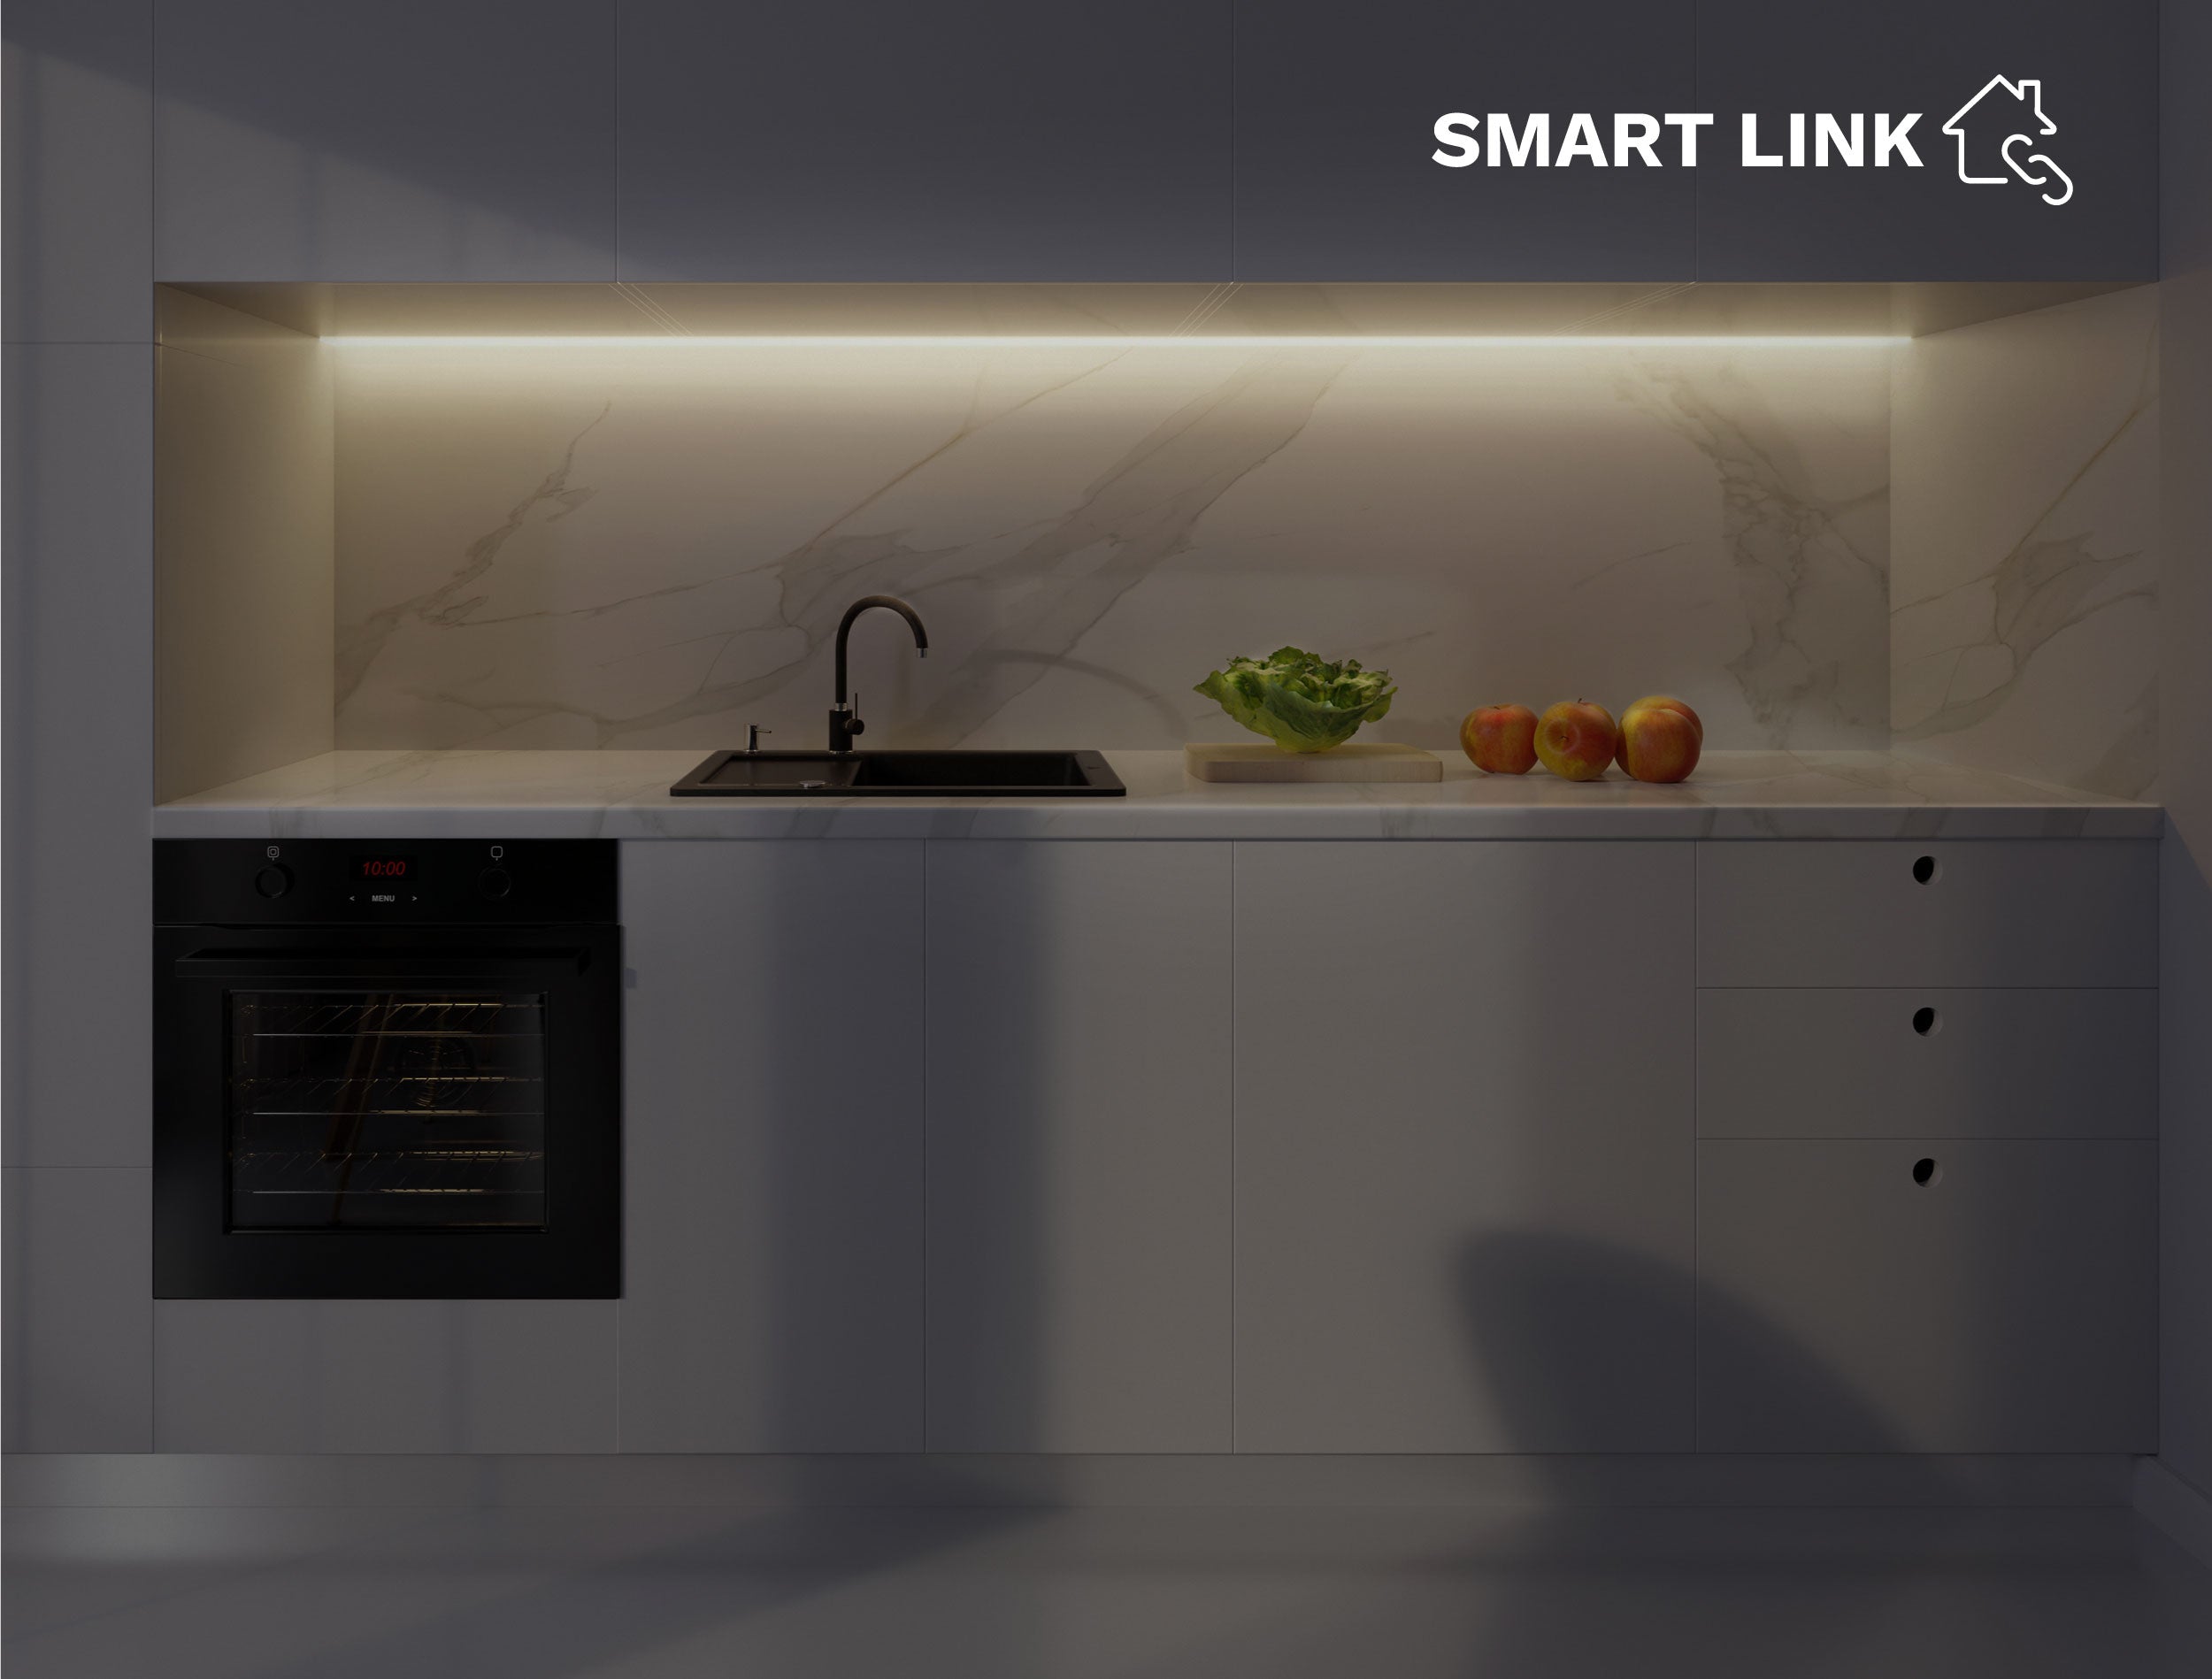 dark-room-kitchen-with-smart-light-switch-turned-on-kitchen-top